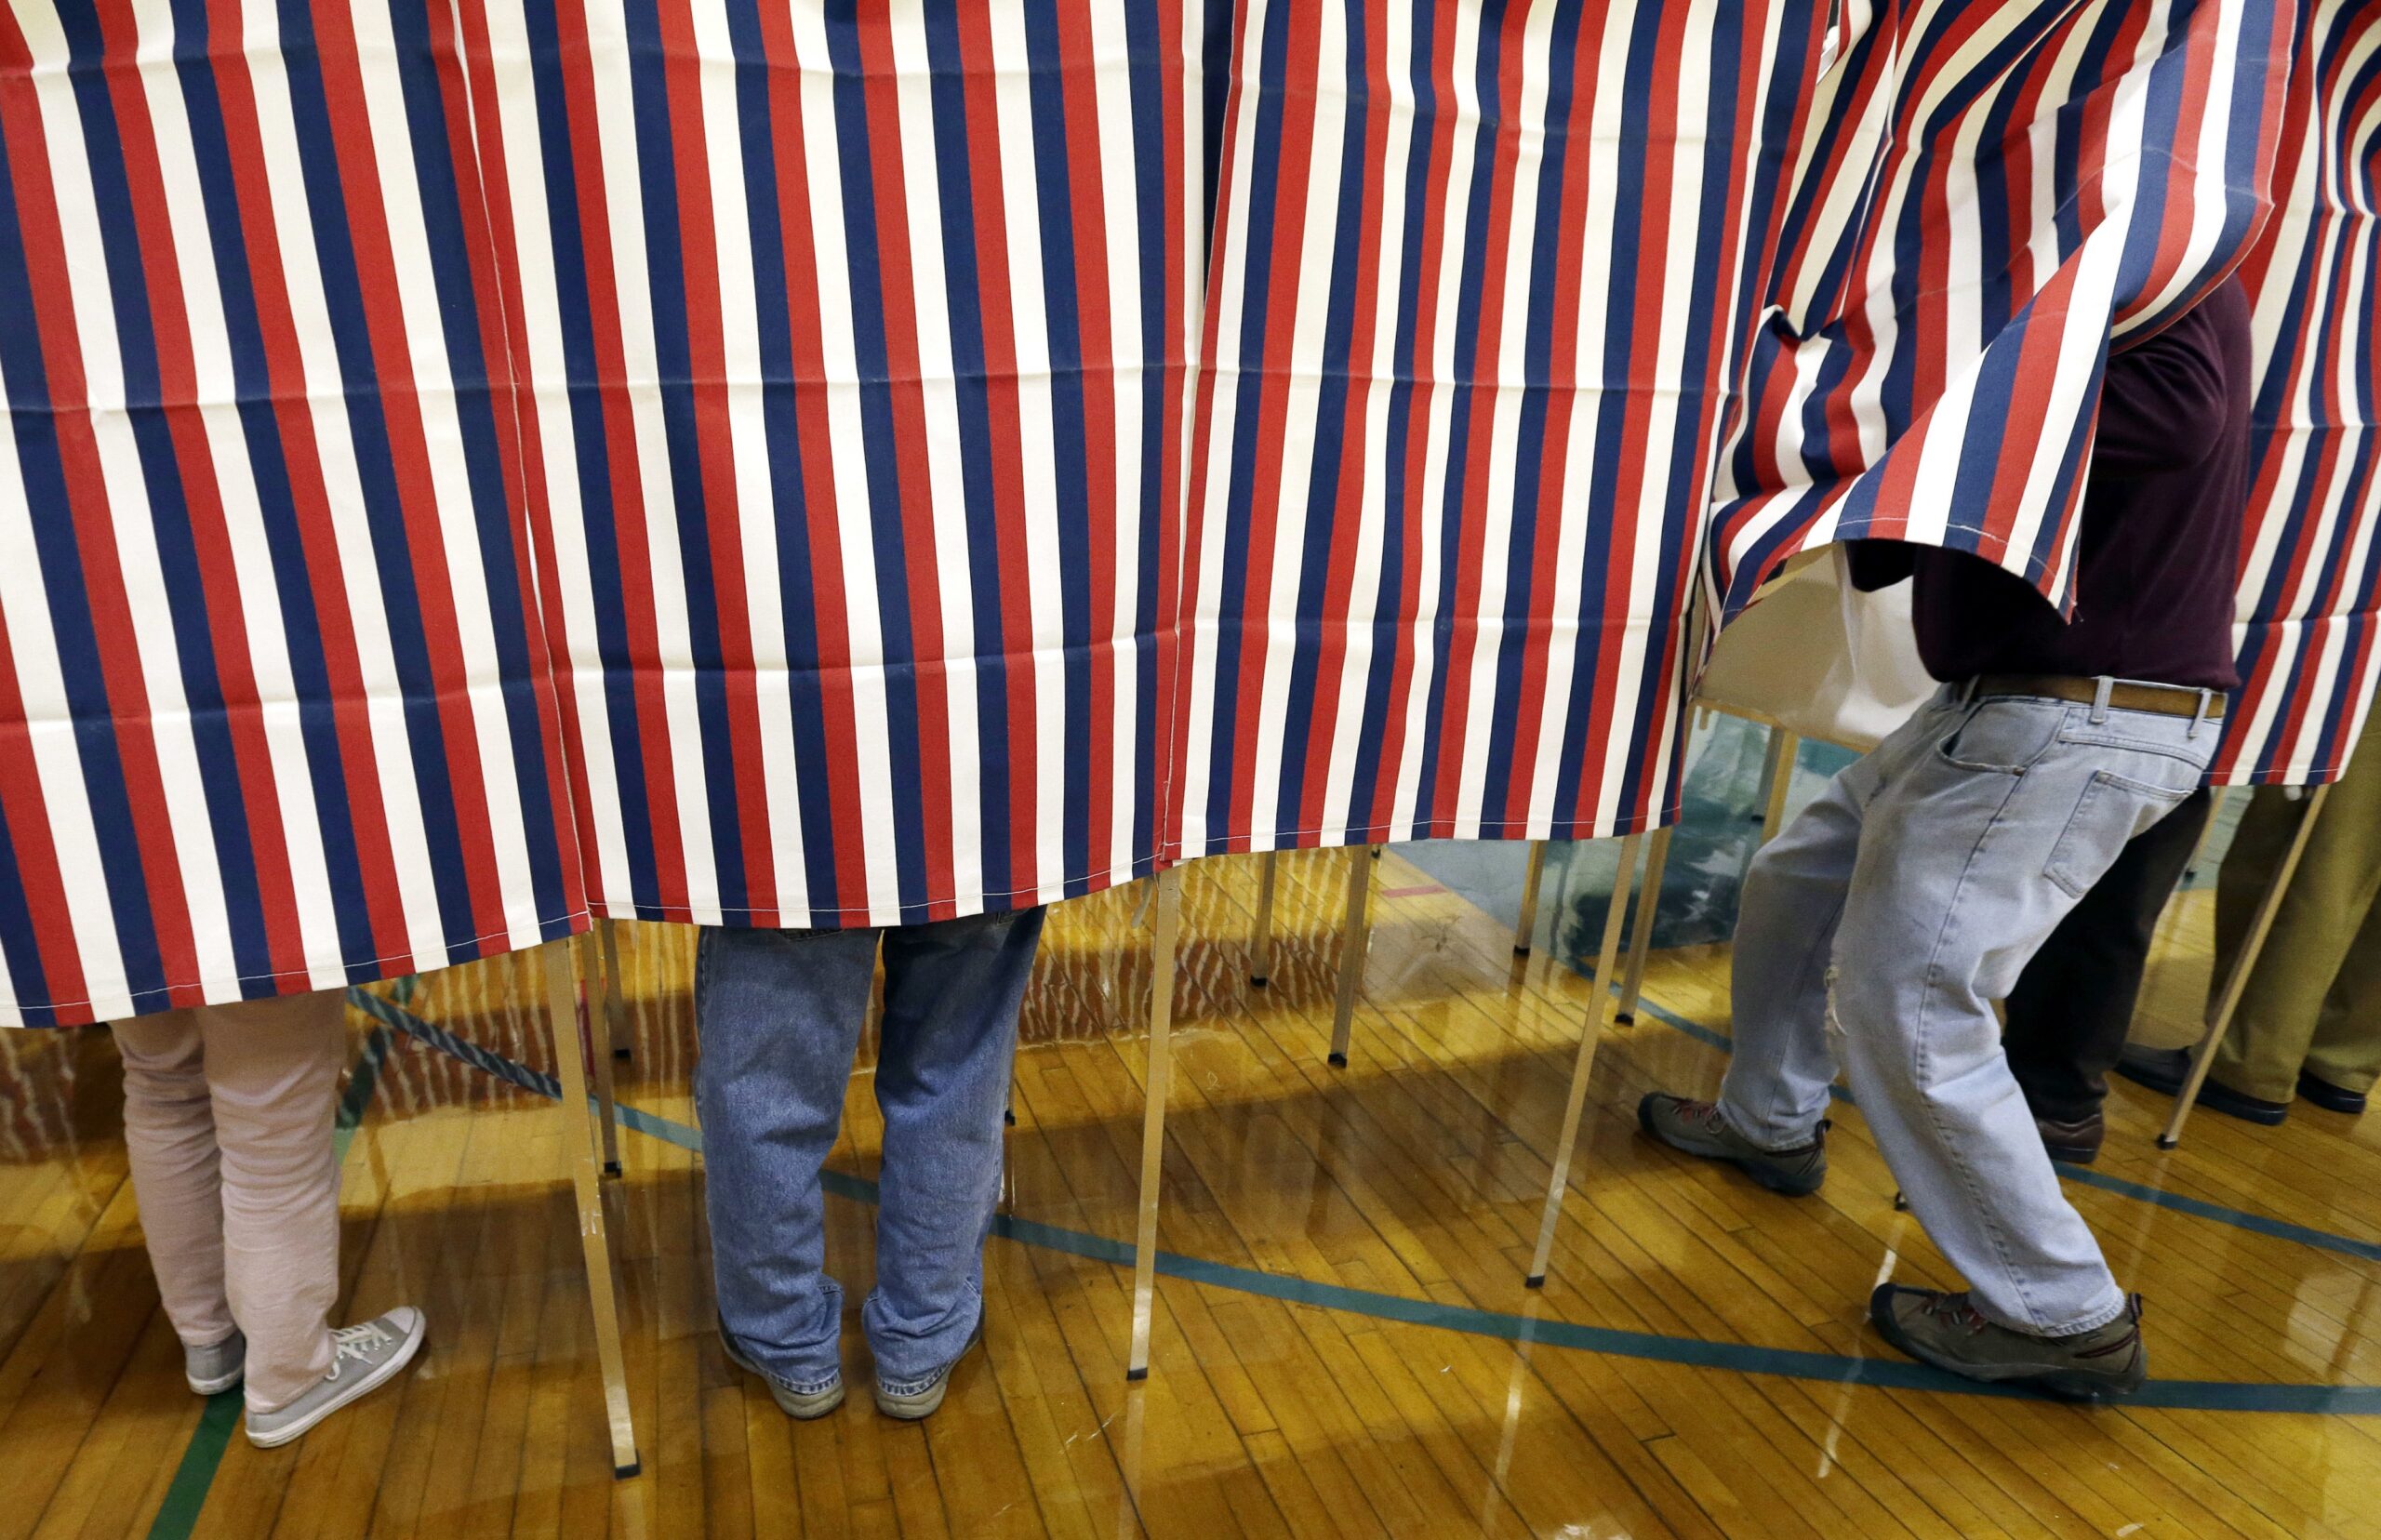 People voting behind a curtain